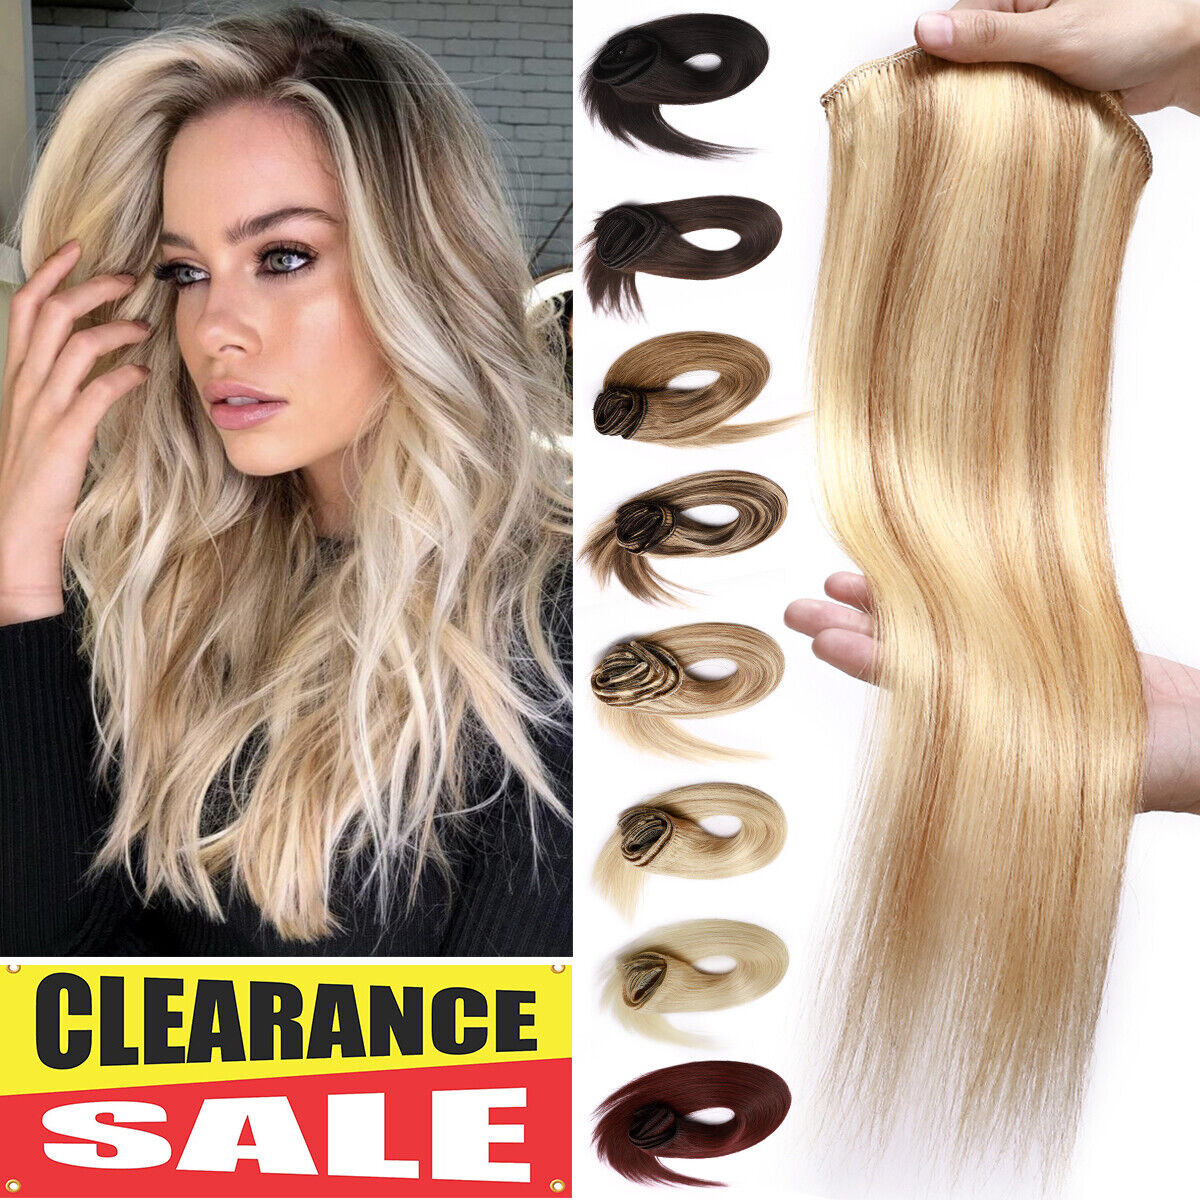 CLEARANCE 100% Real Human Hair Extensions Clip In Remy Hair 8PCS Full Head  Blend | eBay